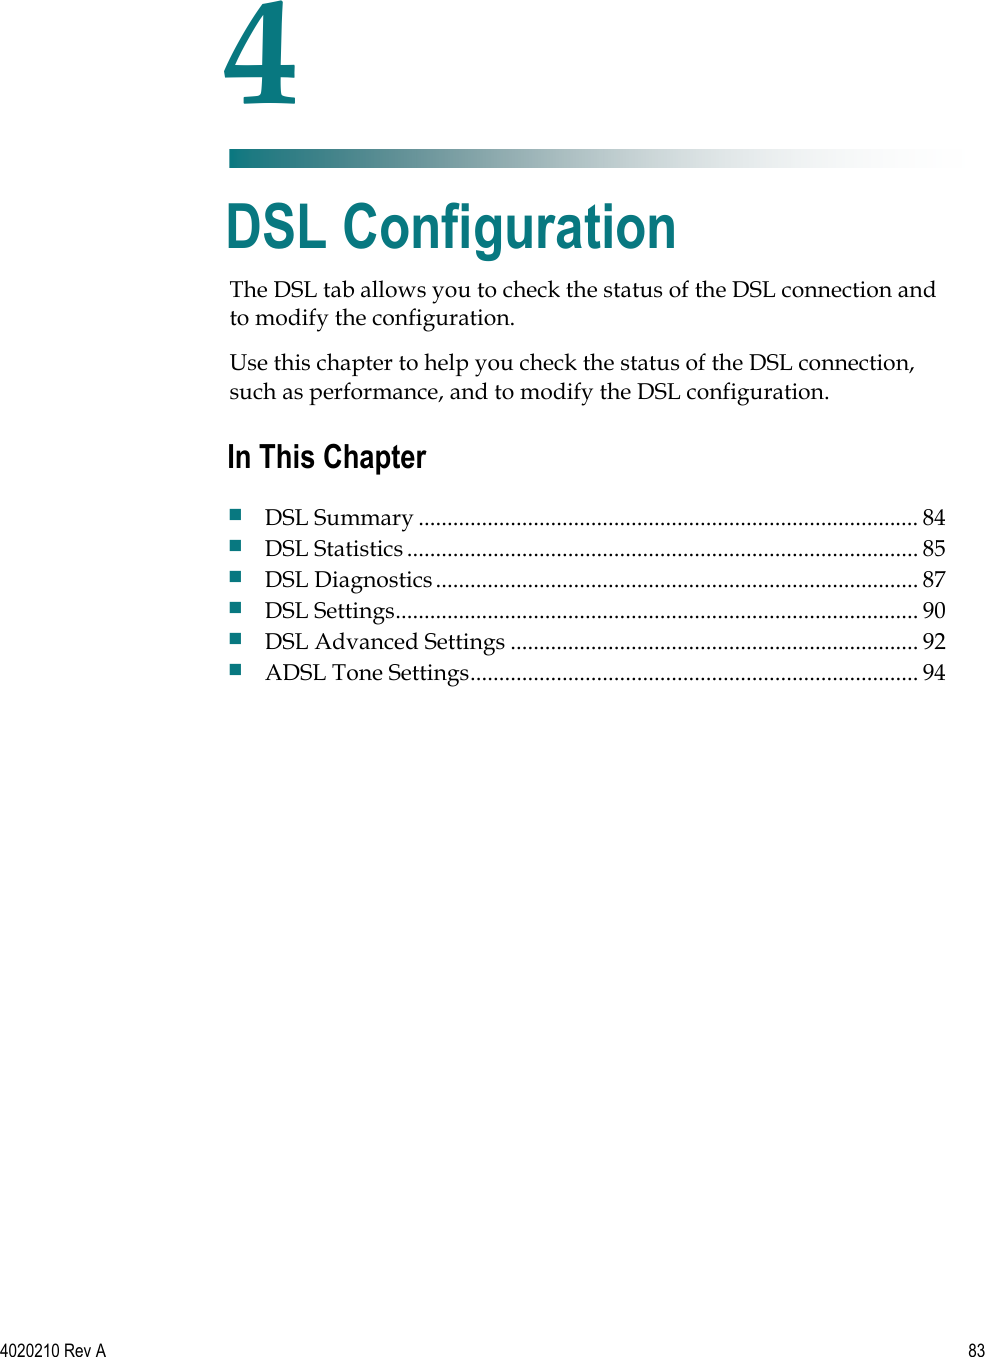   4020210 Rev A 83  The DSL tab allows you to check the status of the DSL connection and to modify the configuration. Use this chapter to help you check the status of the DSL connection, such as performance, and to modify the DSL configuration.    4 Chapter 4 DSL Configuration In This Chapter  DSL Summary ....................................................................................... 84  DSL Statistics......................................................................................... 85  DSL Diagnostics.................................................................................... 87  DSL Settings........................................................................................... 90  DSL Advanced Settings ....................................................................... 92  ADSL Tone Settings.............................................................................. 94 